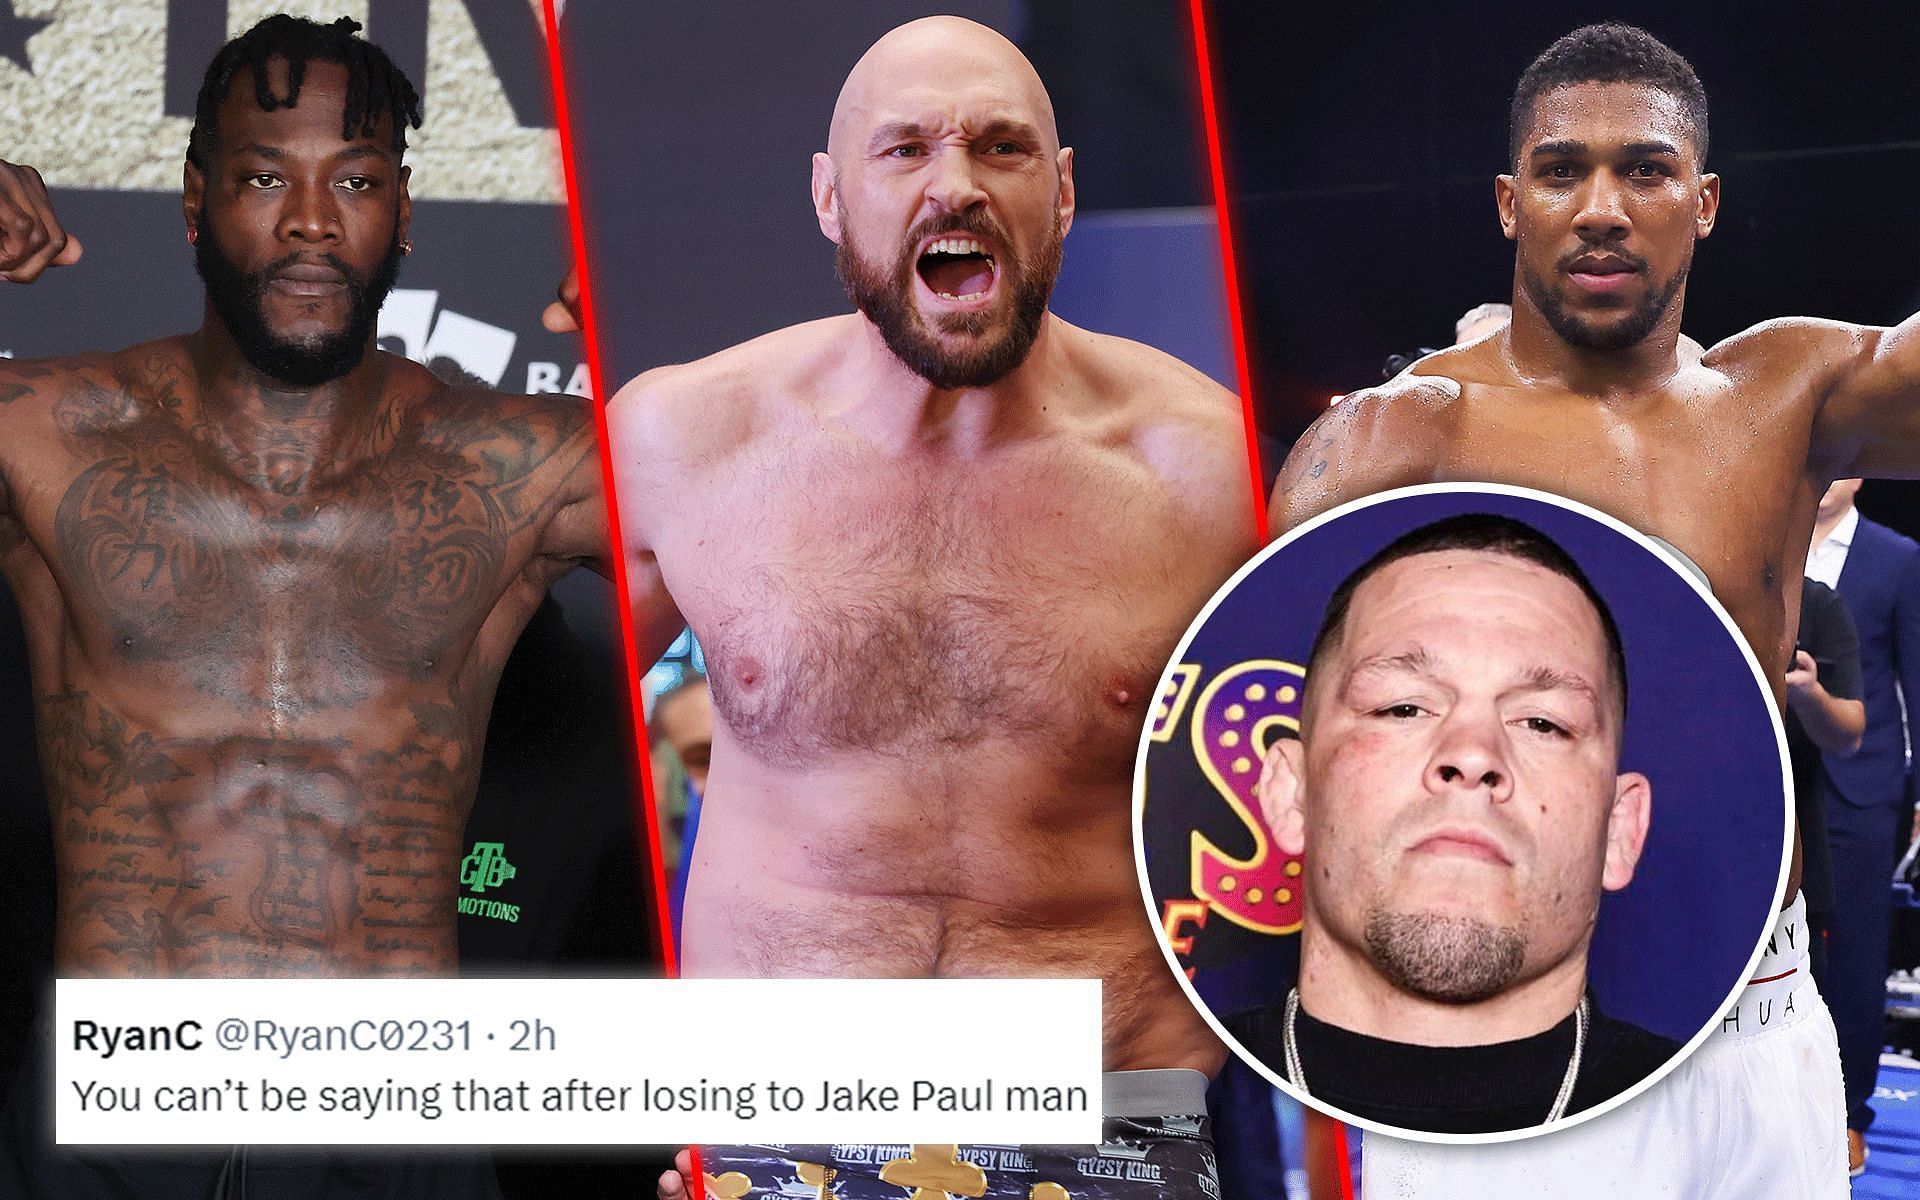 Fans react as Nate Diaz takes aim at Deontay Wilder (left), Anthony Joshua (center) and Tyson Fury (right) [Image via: @natediaz209 on Instagram and Getty]